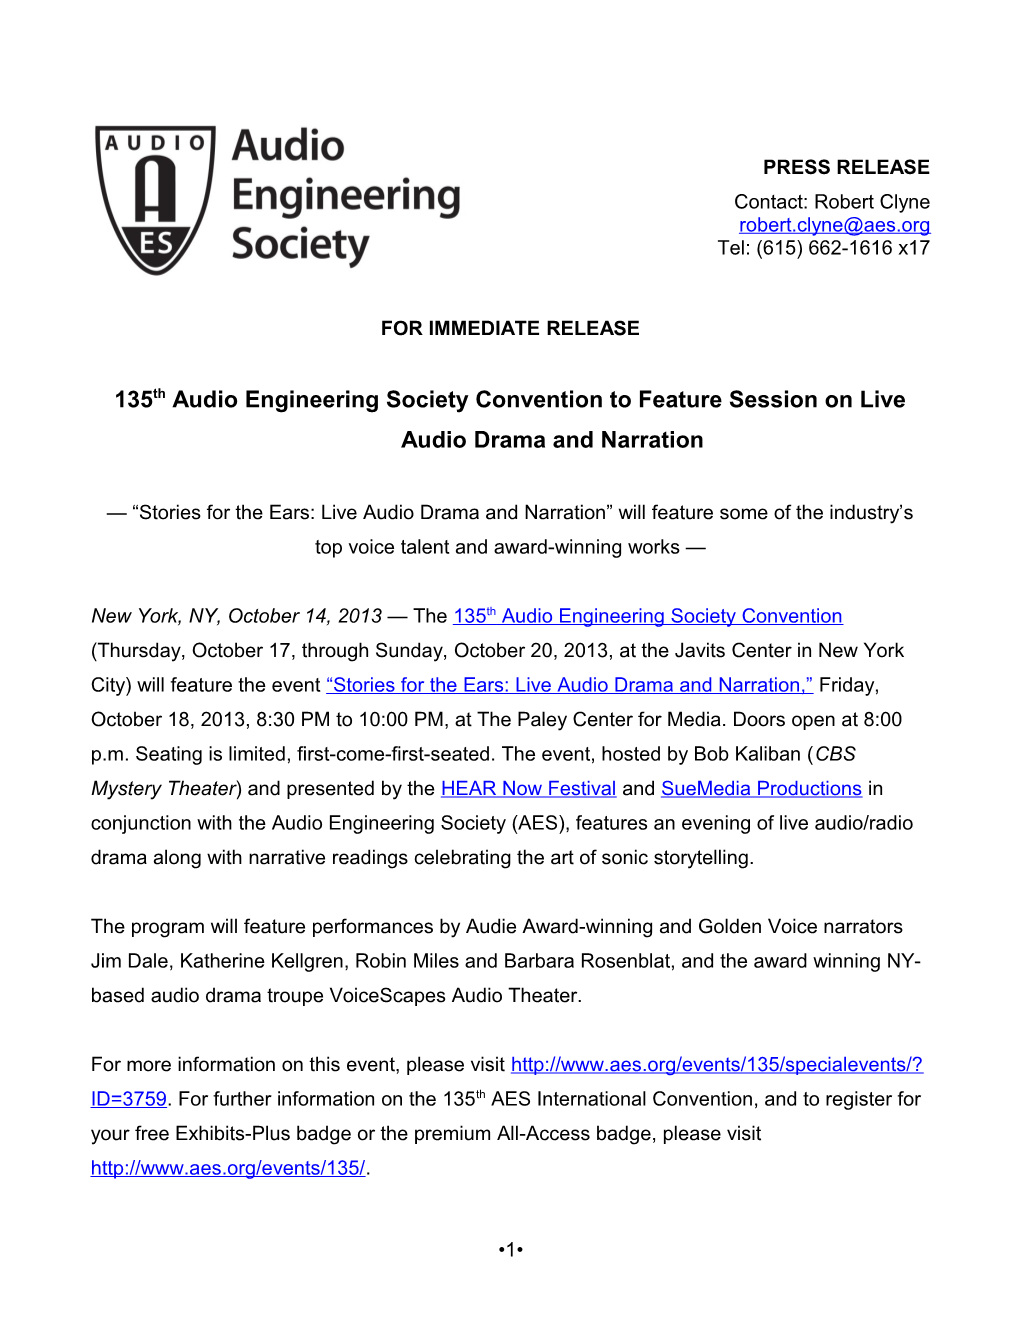 135Thaudio Engineering Society Convention to Feature Session on Live Audio Drama and Narration